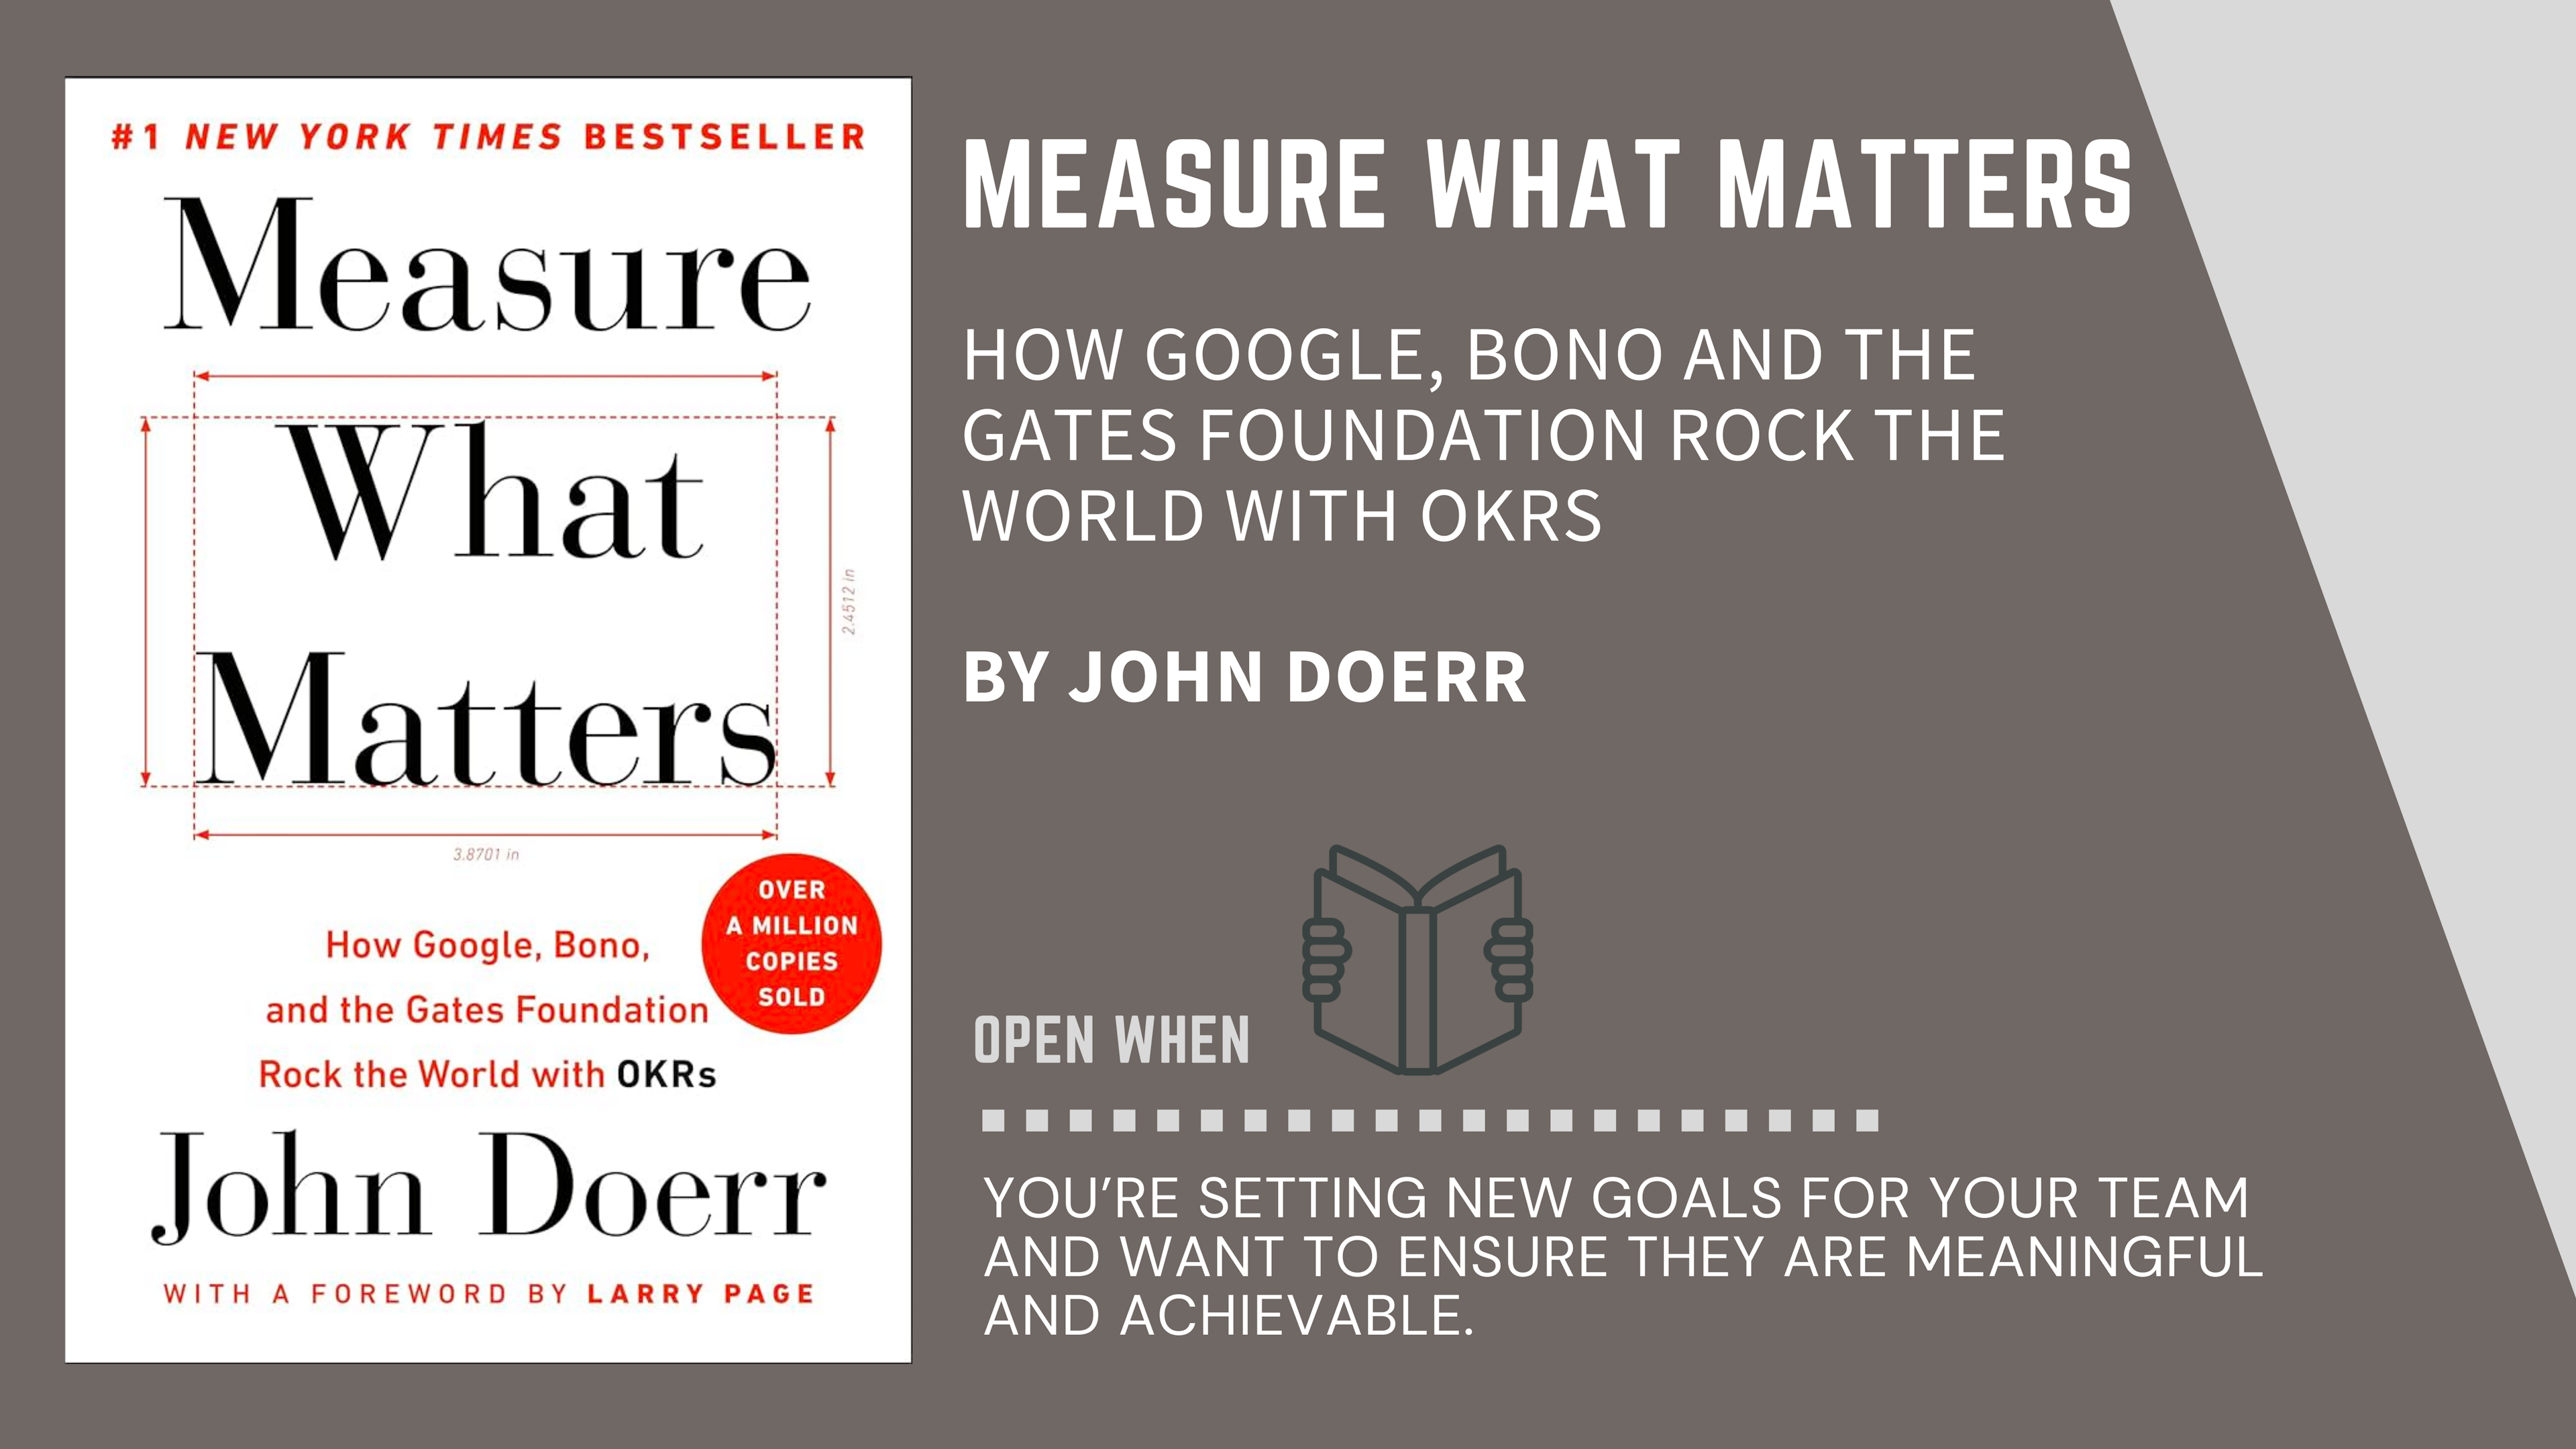 Book Cover of "Measure What Matters" by John Doerr